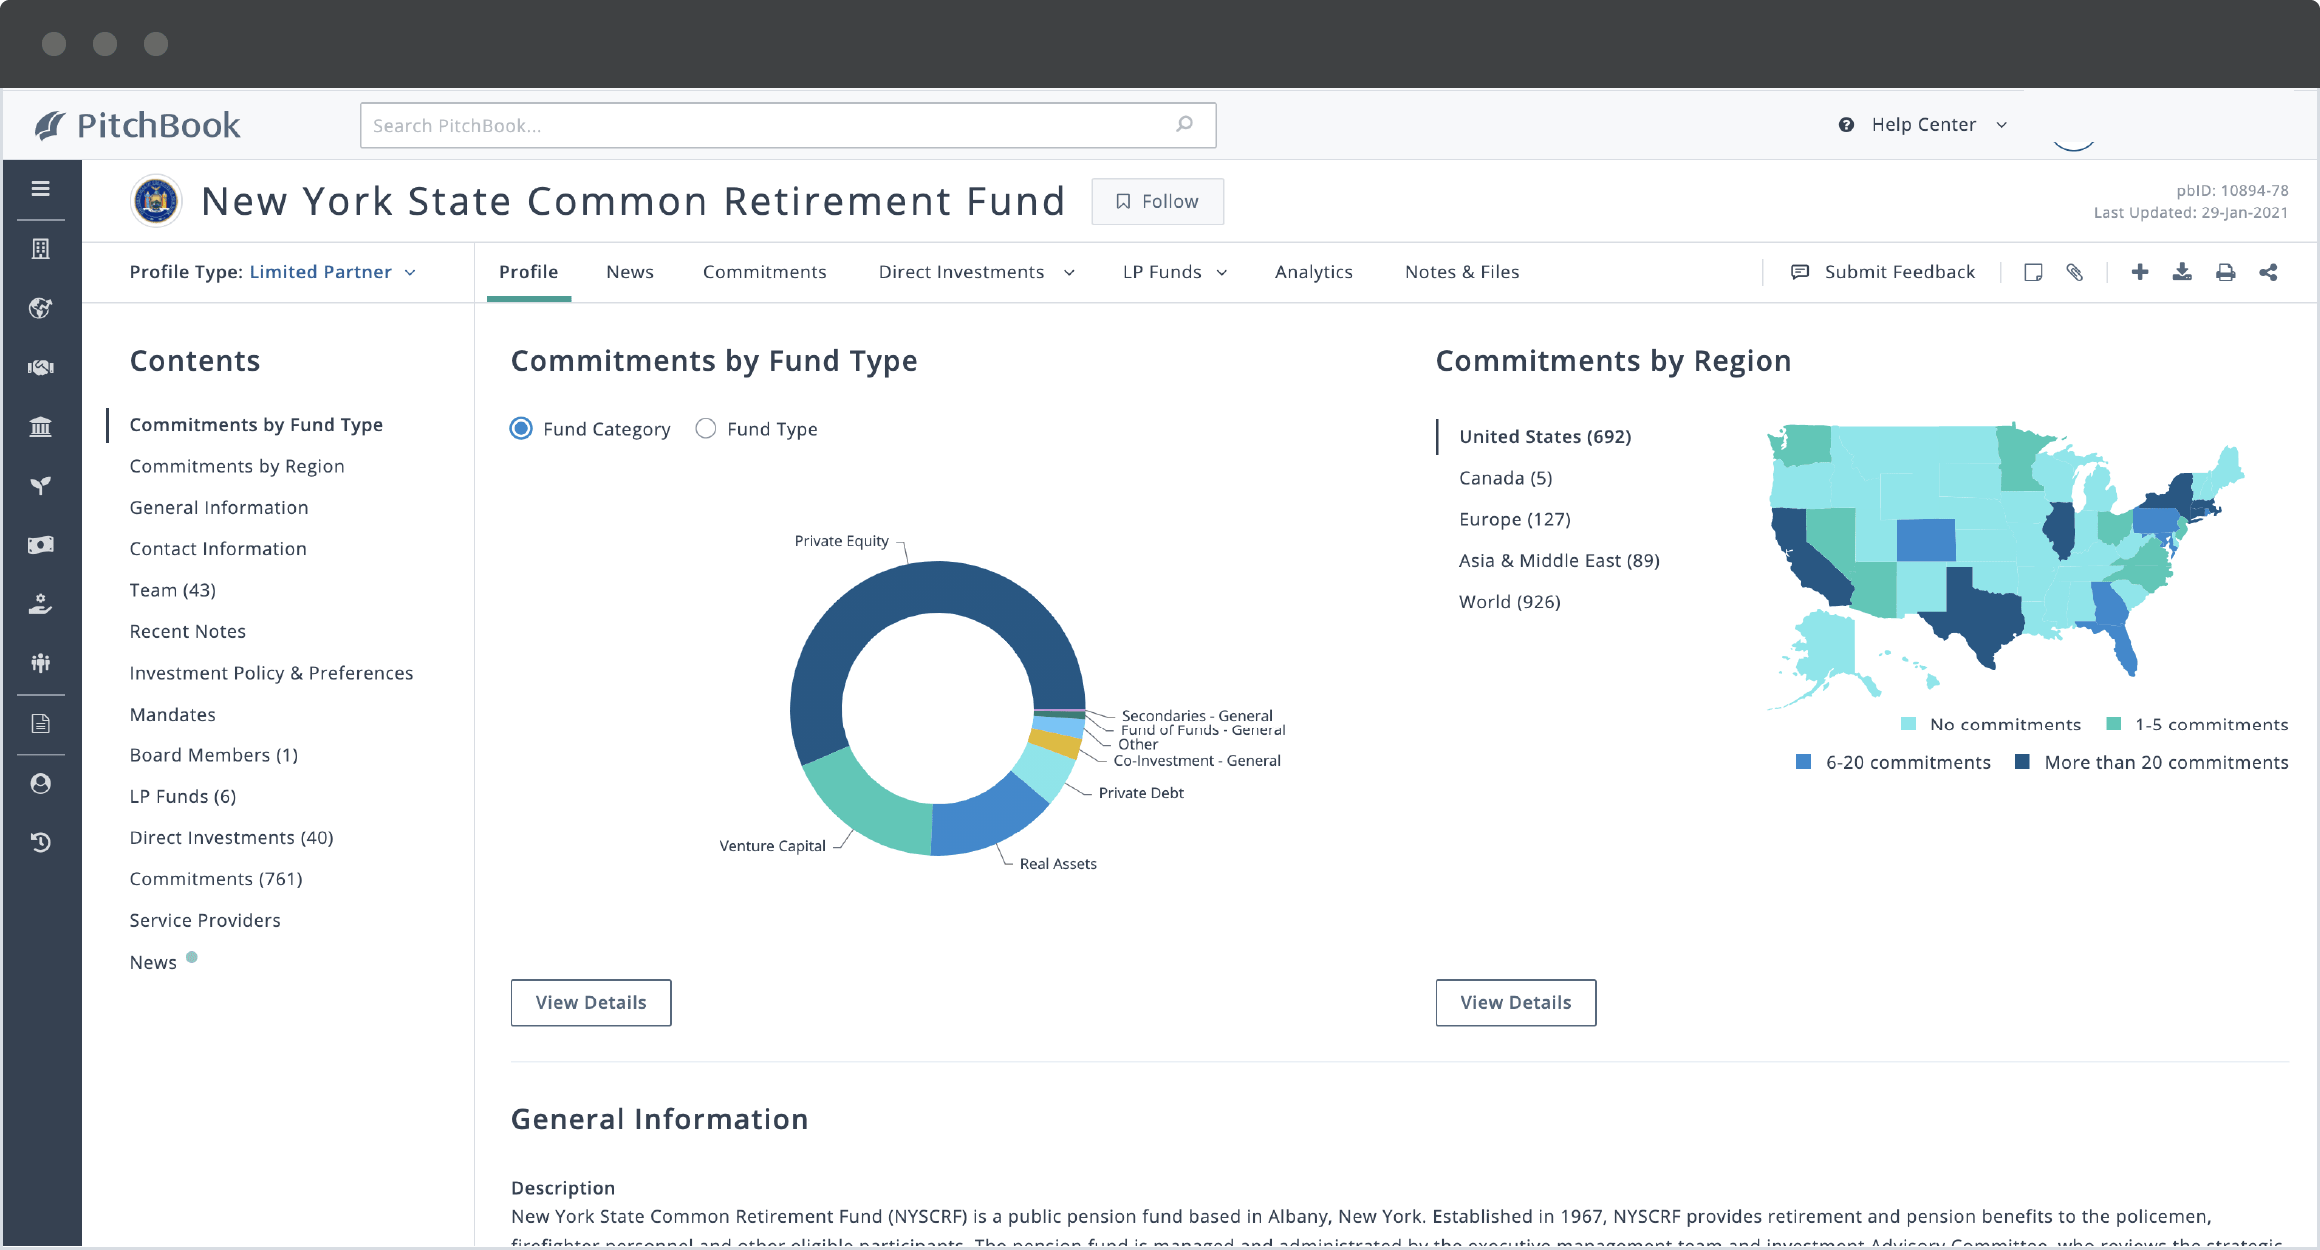 PitchBook limited partner profile showing New York State Common Retirement Fund’s commitments by fund type and region.